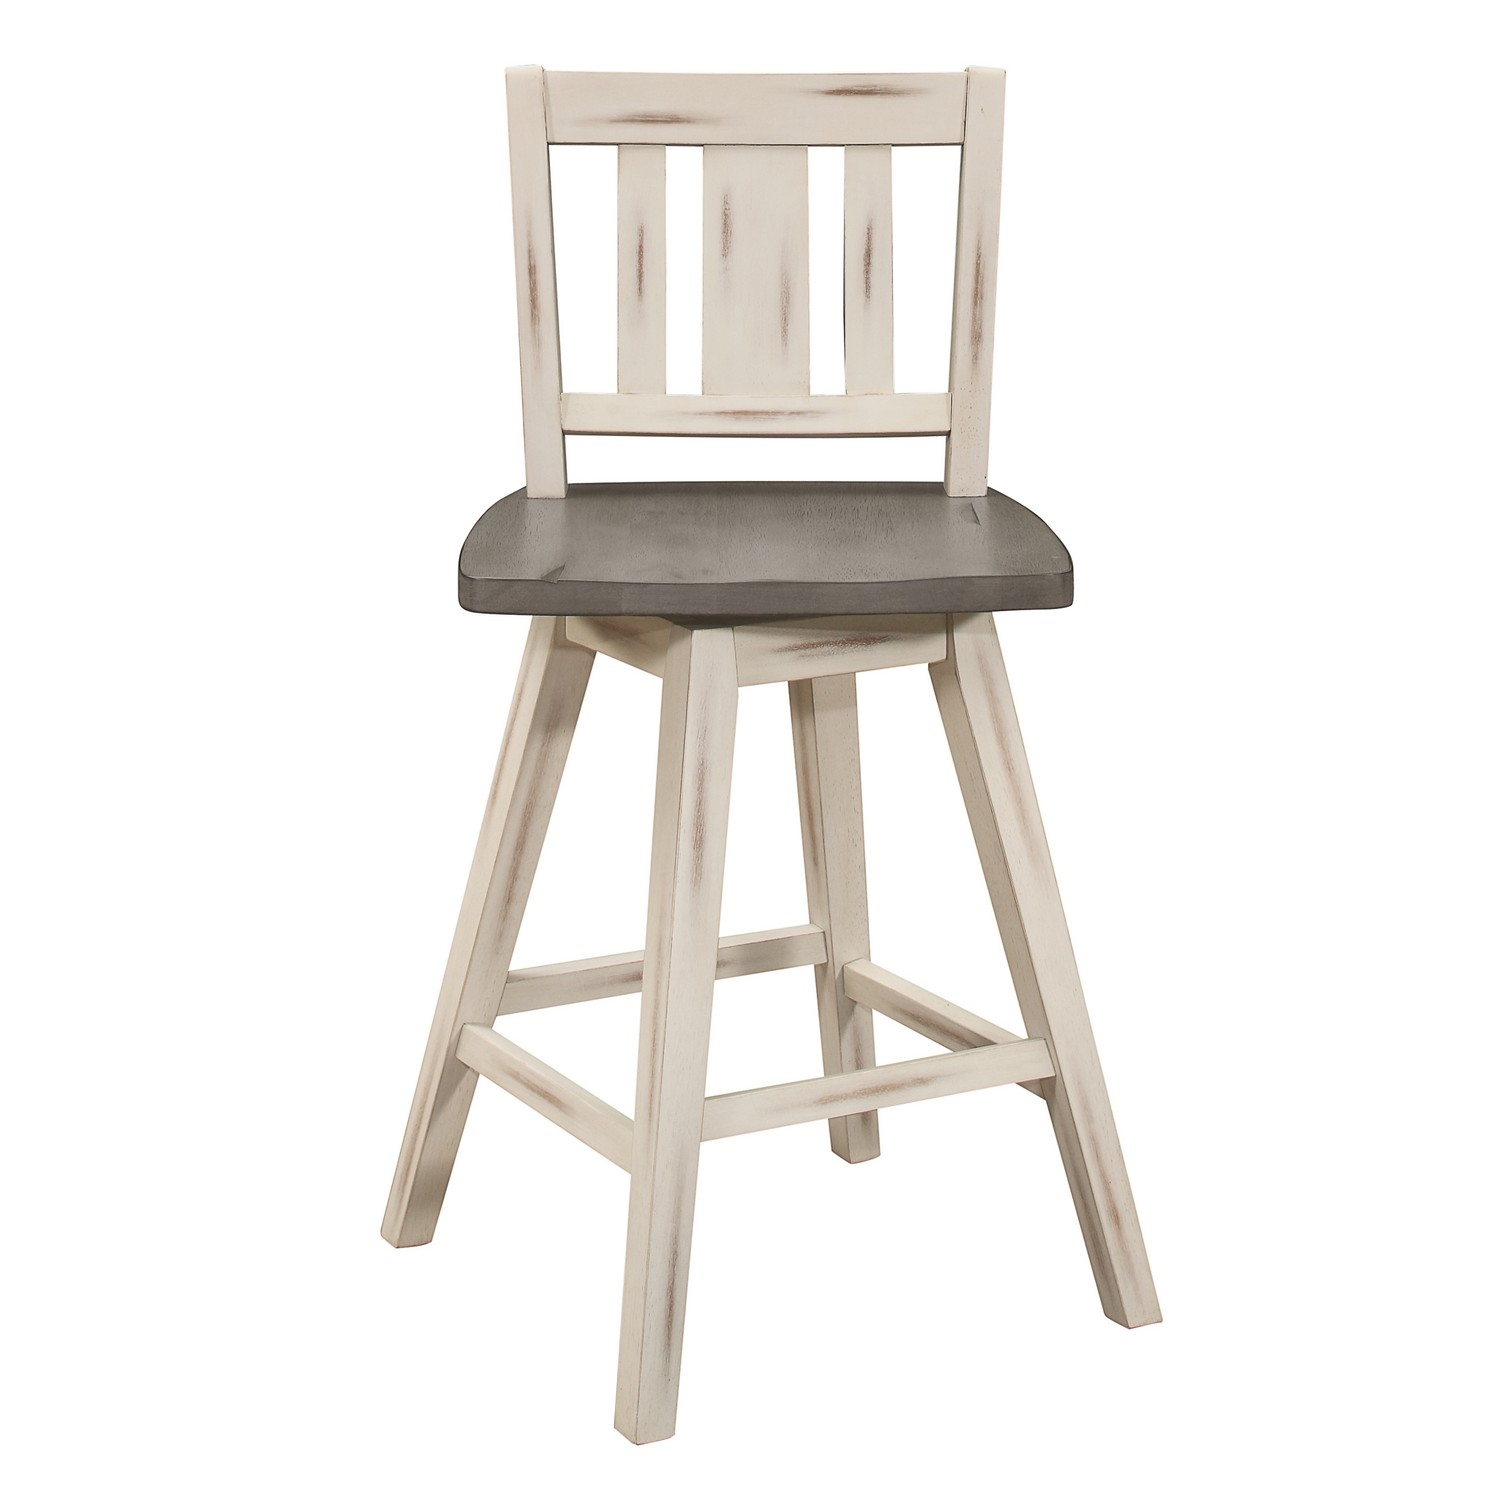 Homelegance Amsonia Swivel Counter Height Chair - Distressed Gray/White